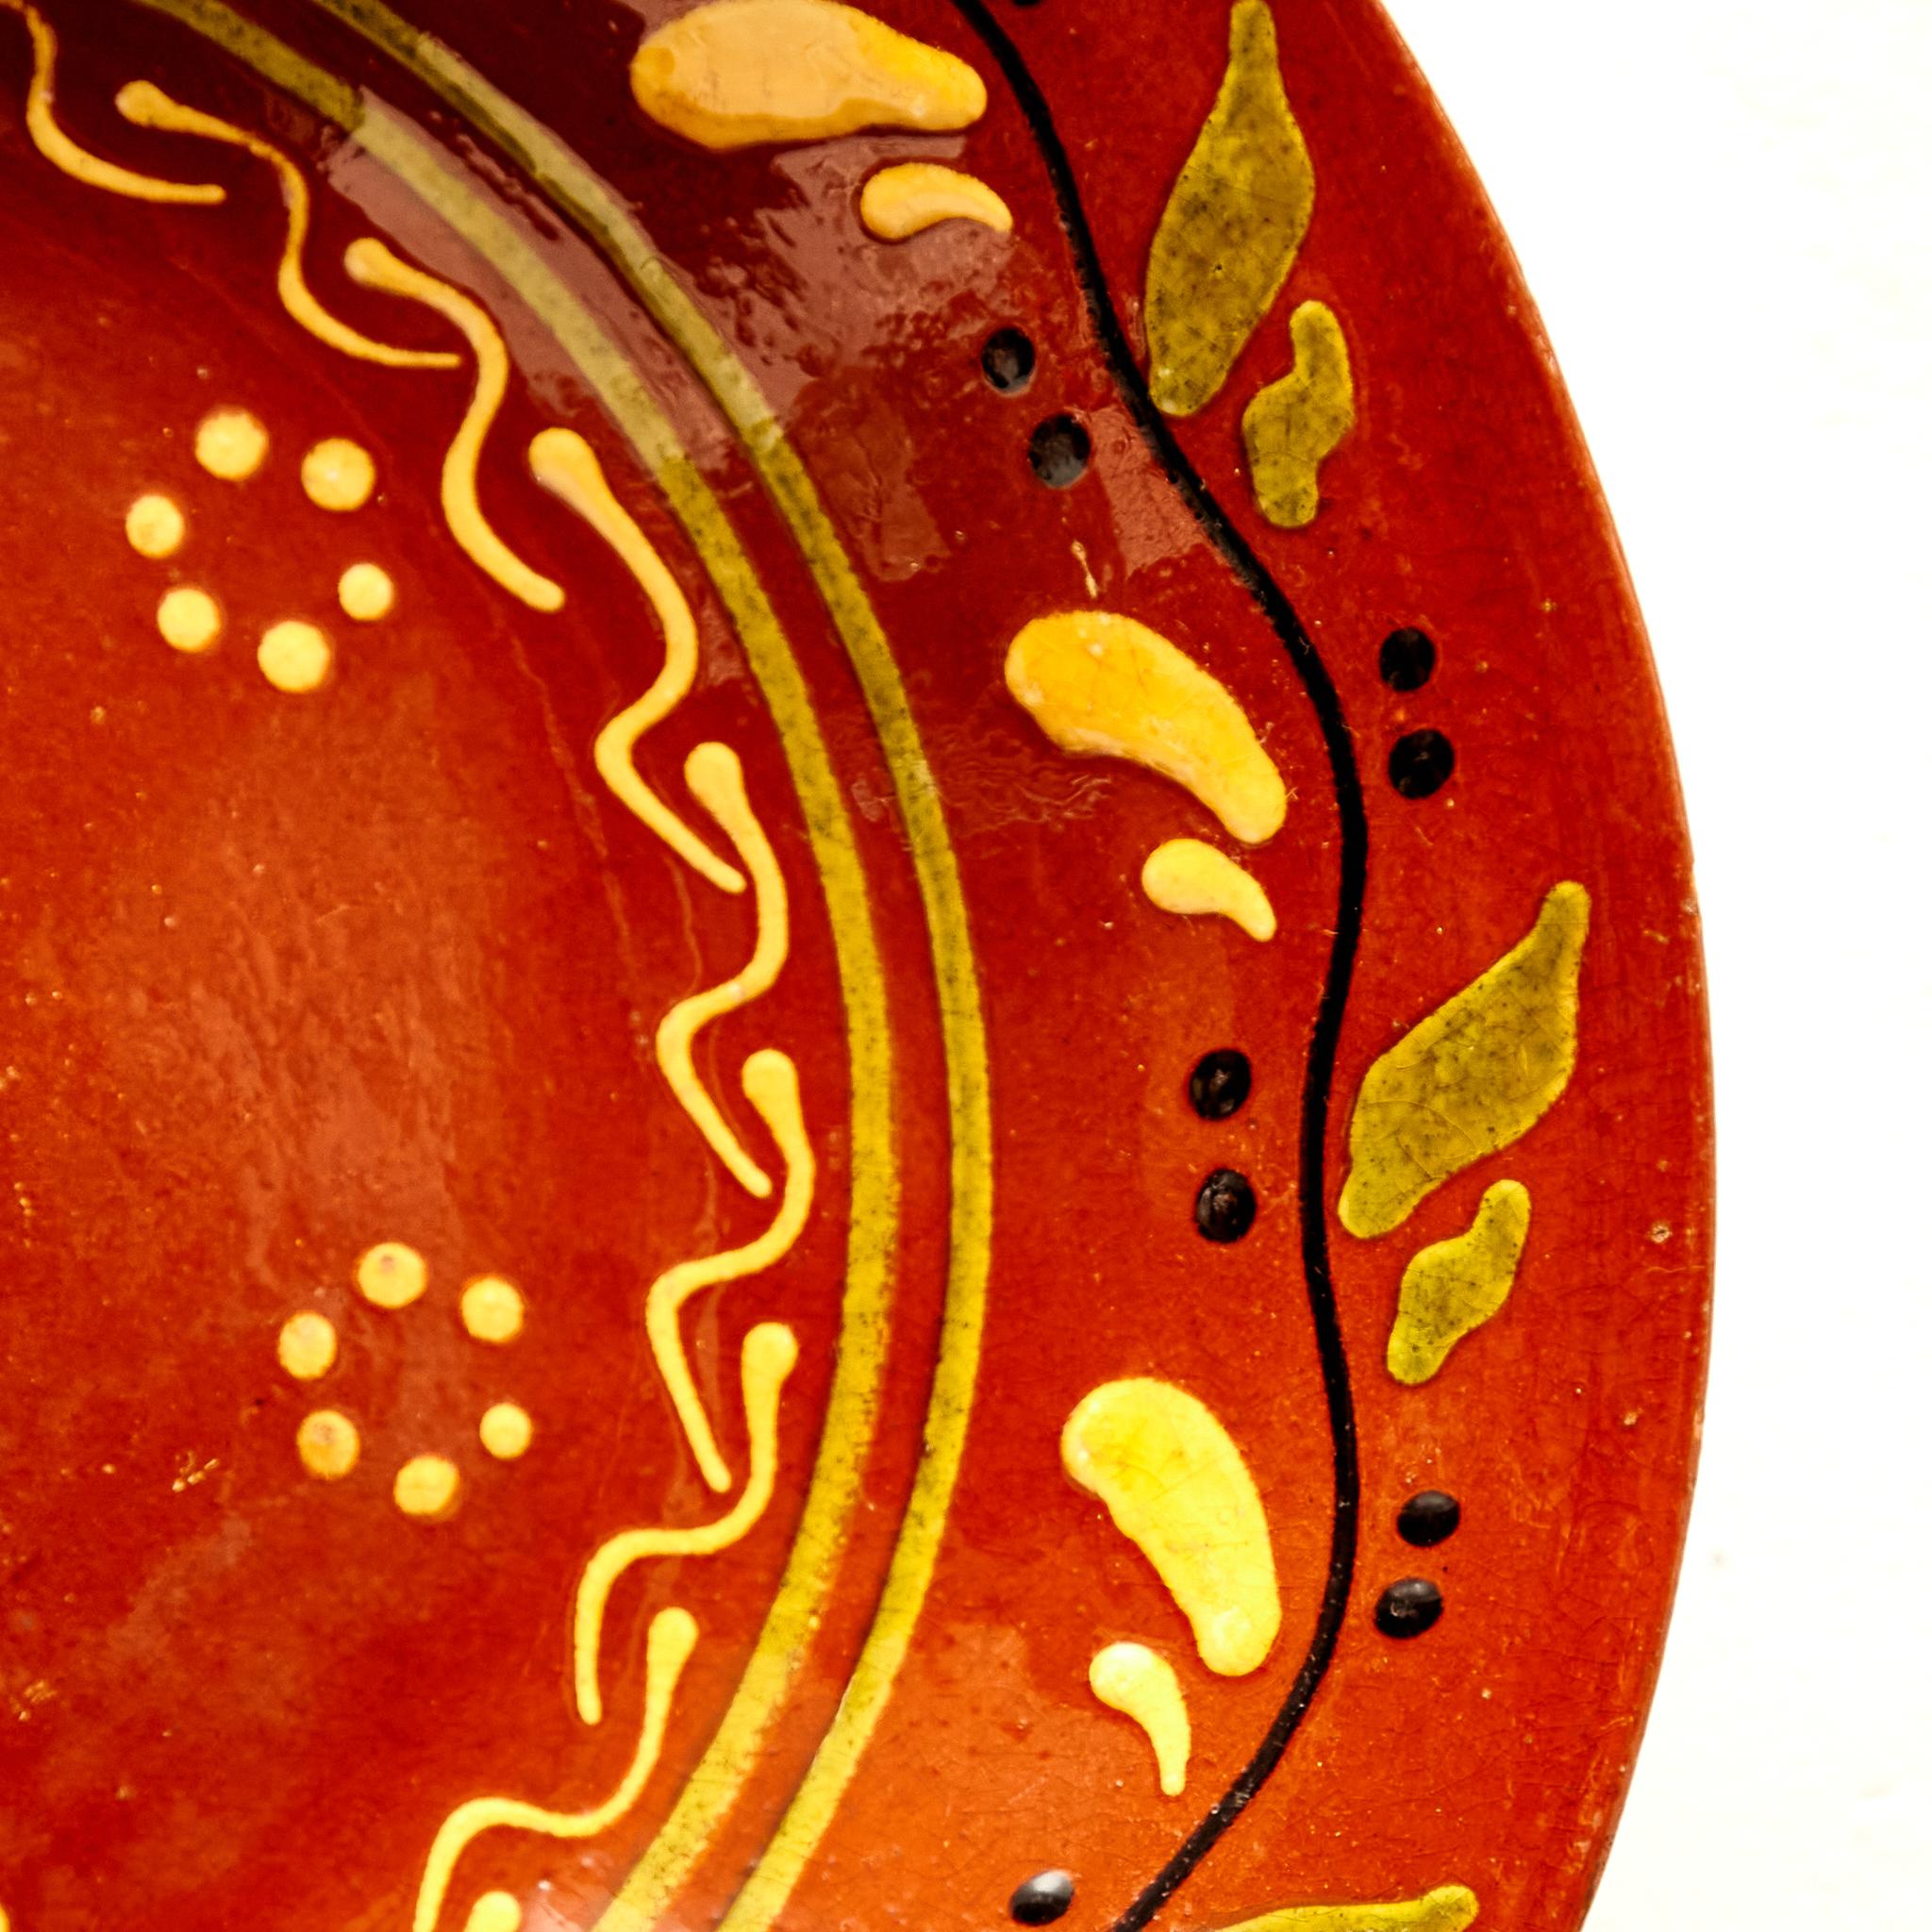 Hand-Painted Traditional Spanish Rustic Decorative Hand Painted Ceramic Plate, circa 1940